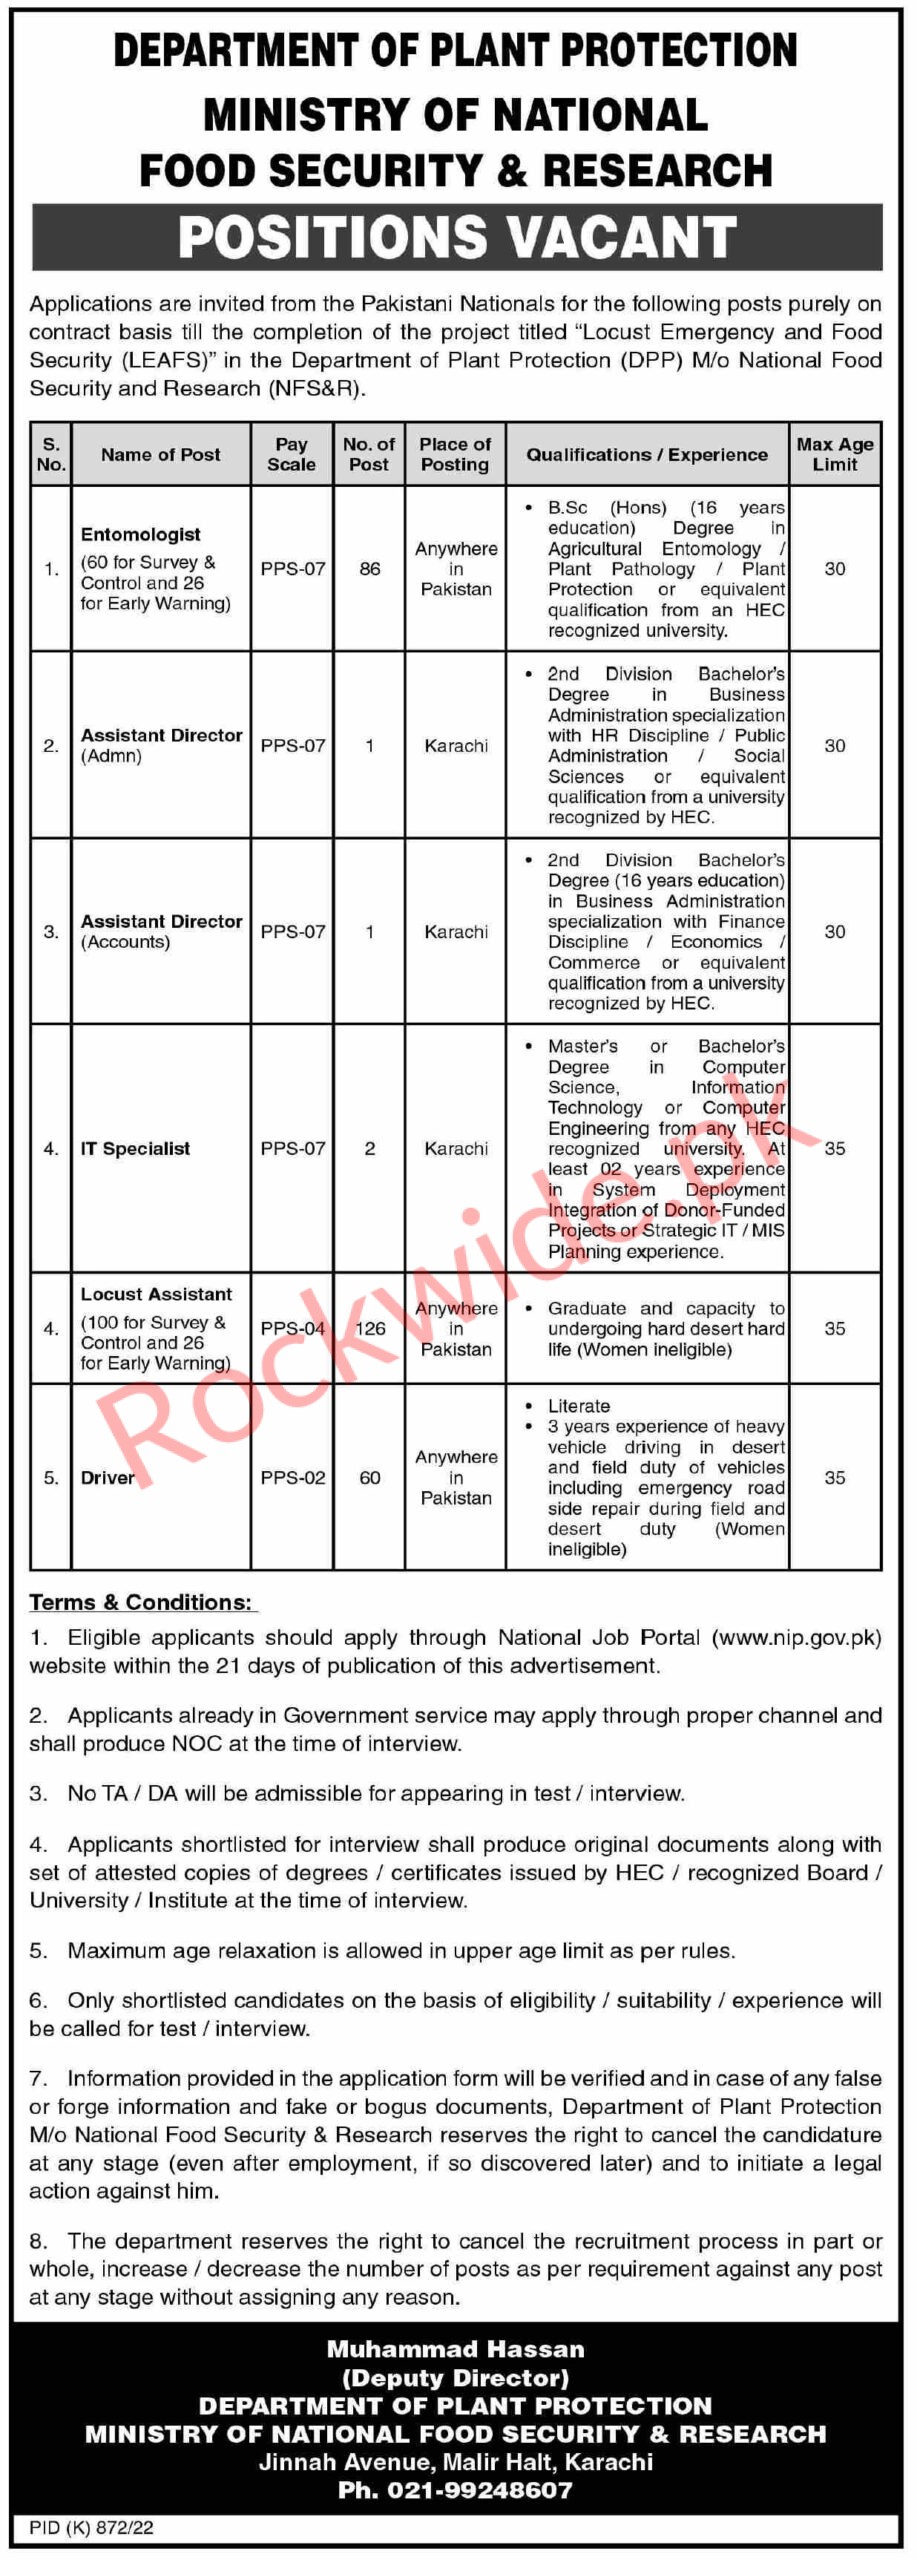 Ministry of National Food Security & Researc H JOBS